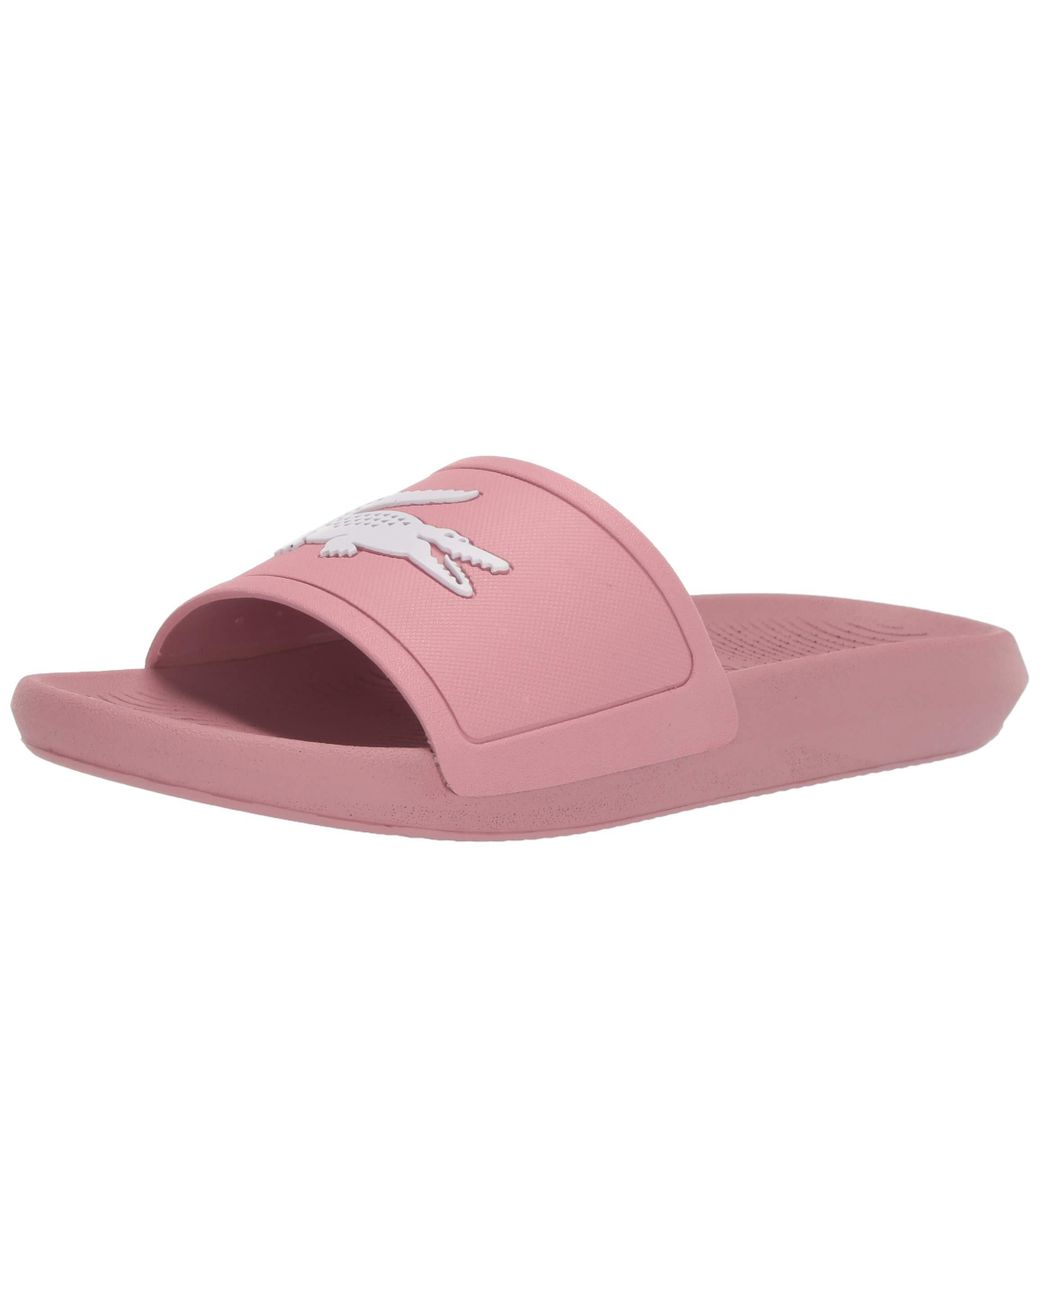 Lacoste Croco Slide Sandals in Pink/White (Pink) - Save 65% - Lyst